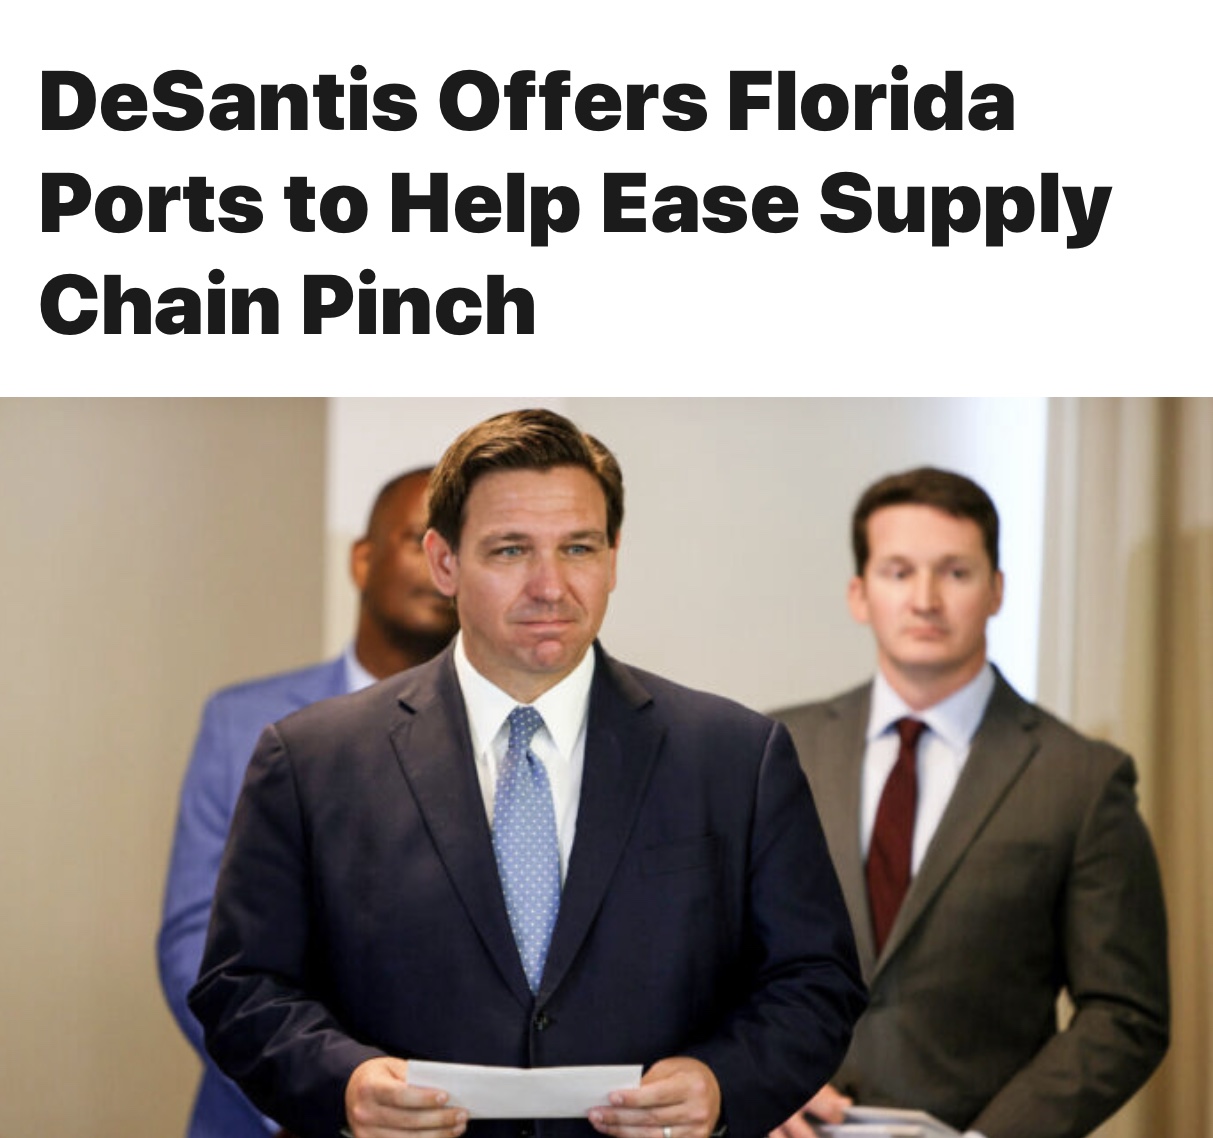 Governor DeSantis Offers Florida Ports to Help Ease Supply Chain Pinch